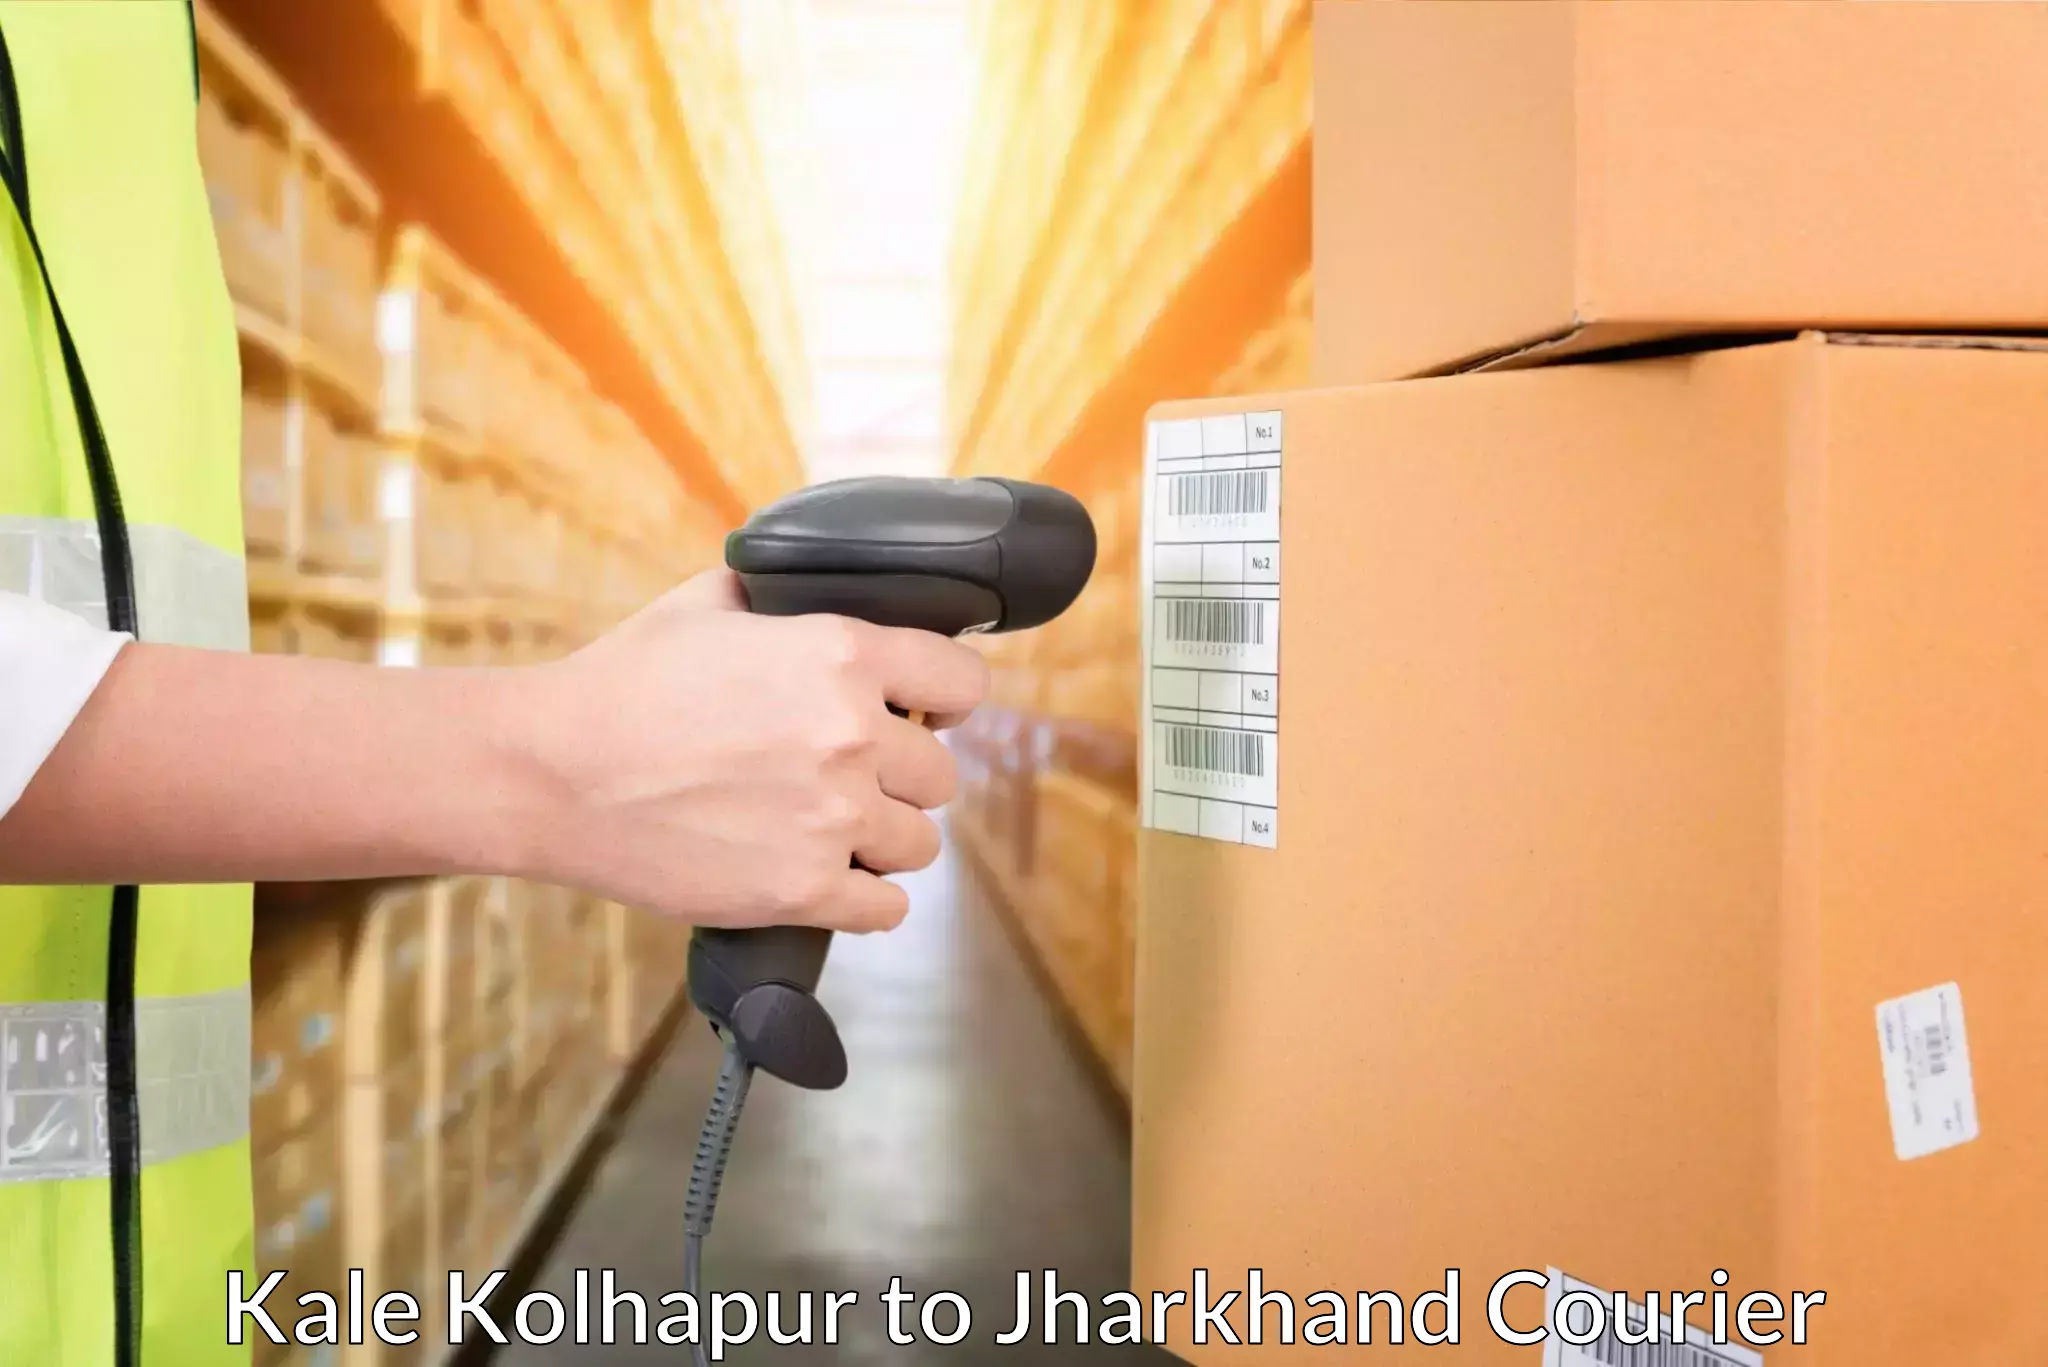 Speedy delivery service Kale Kolhapur to Jharkhand